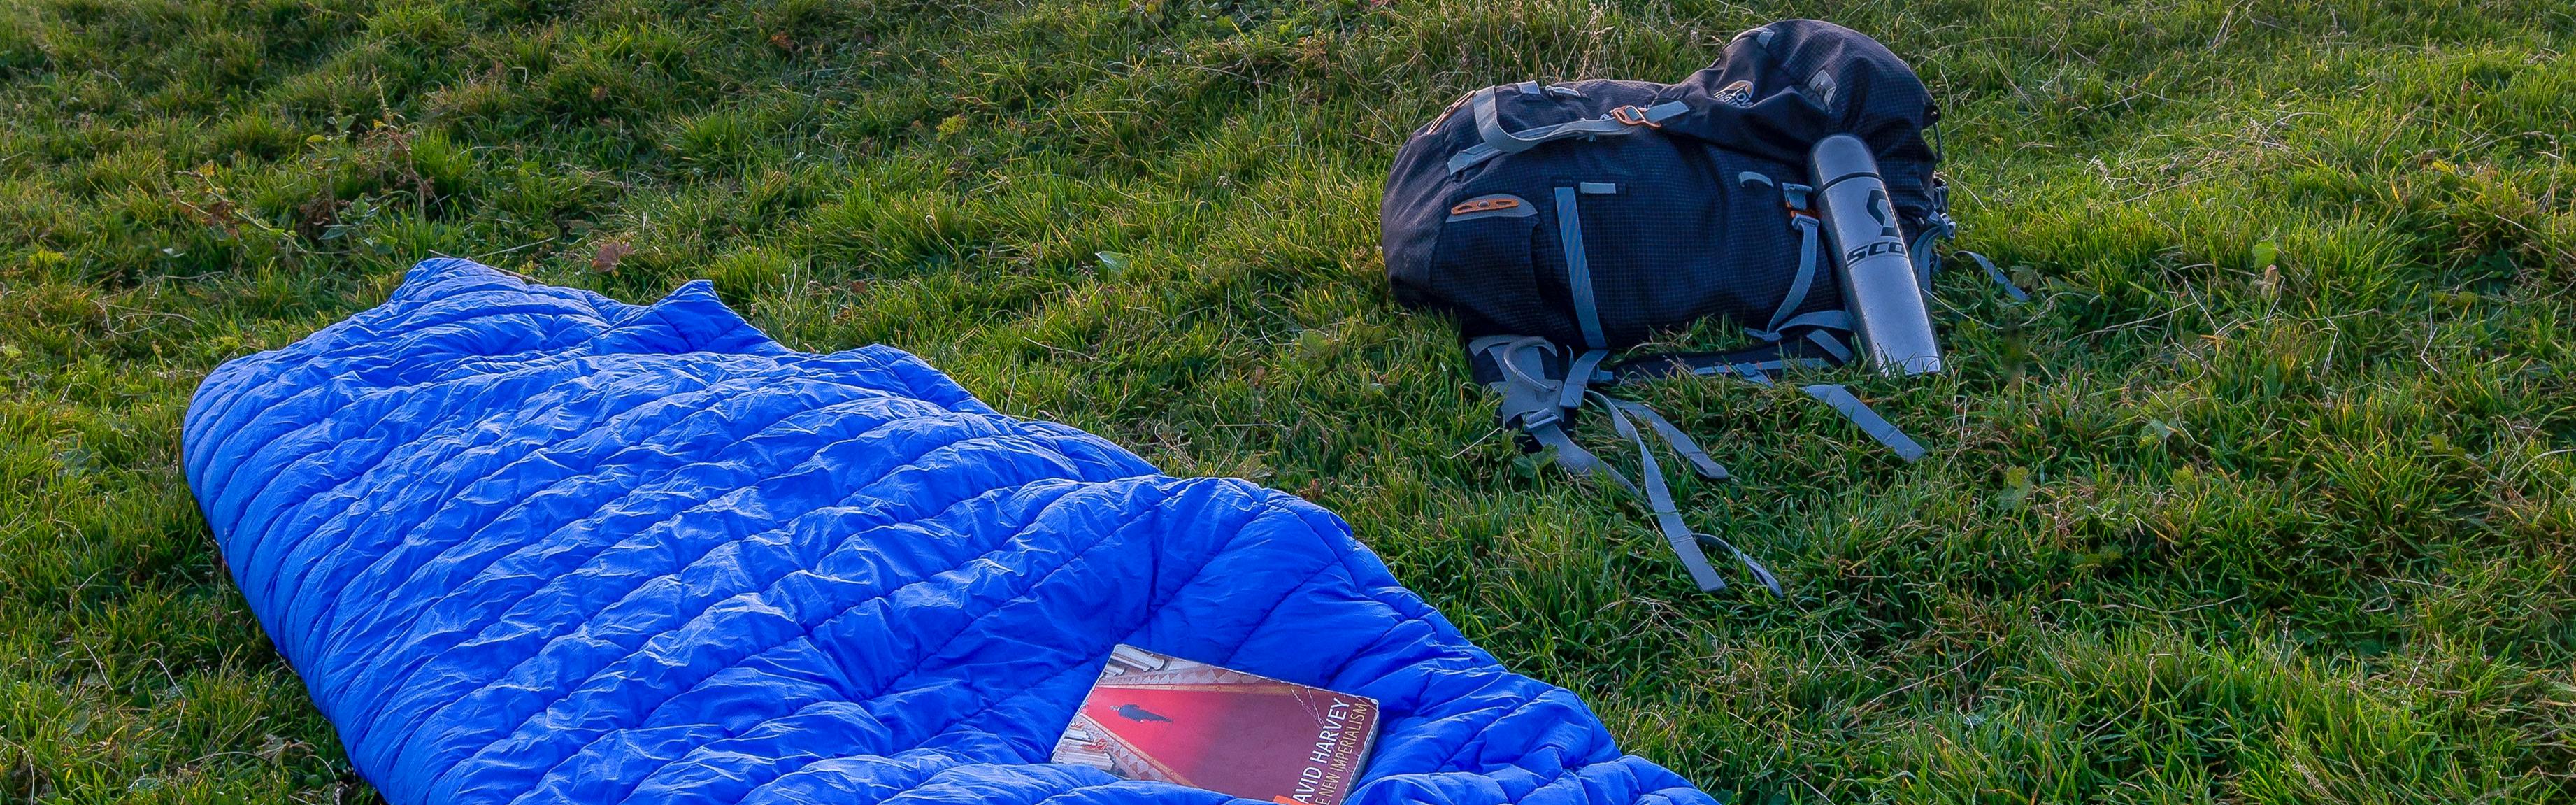 A navy backpack lays next to a royal blue sleeping bag on grassy ground. A book is sitting on top of the sleeping bag. 